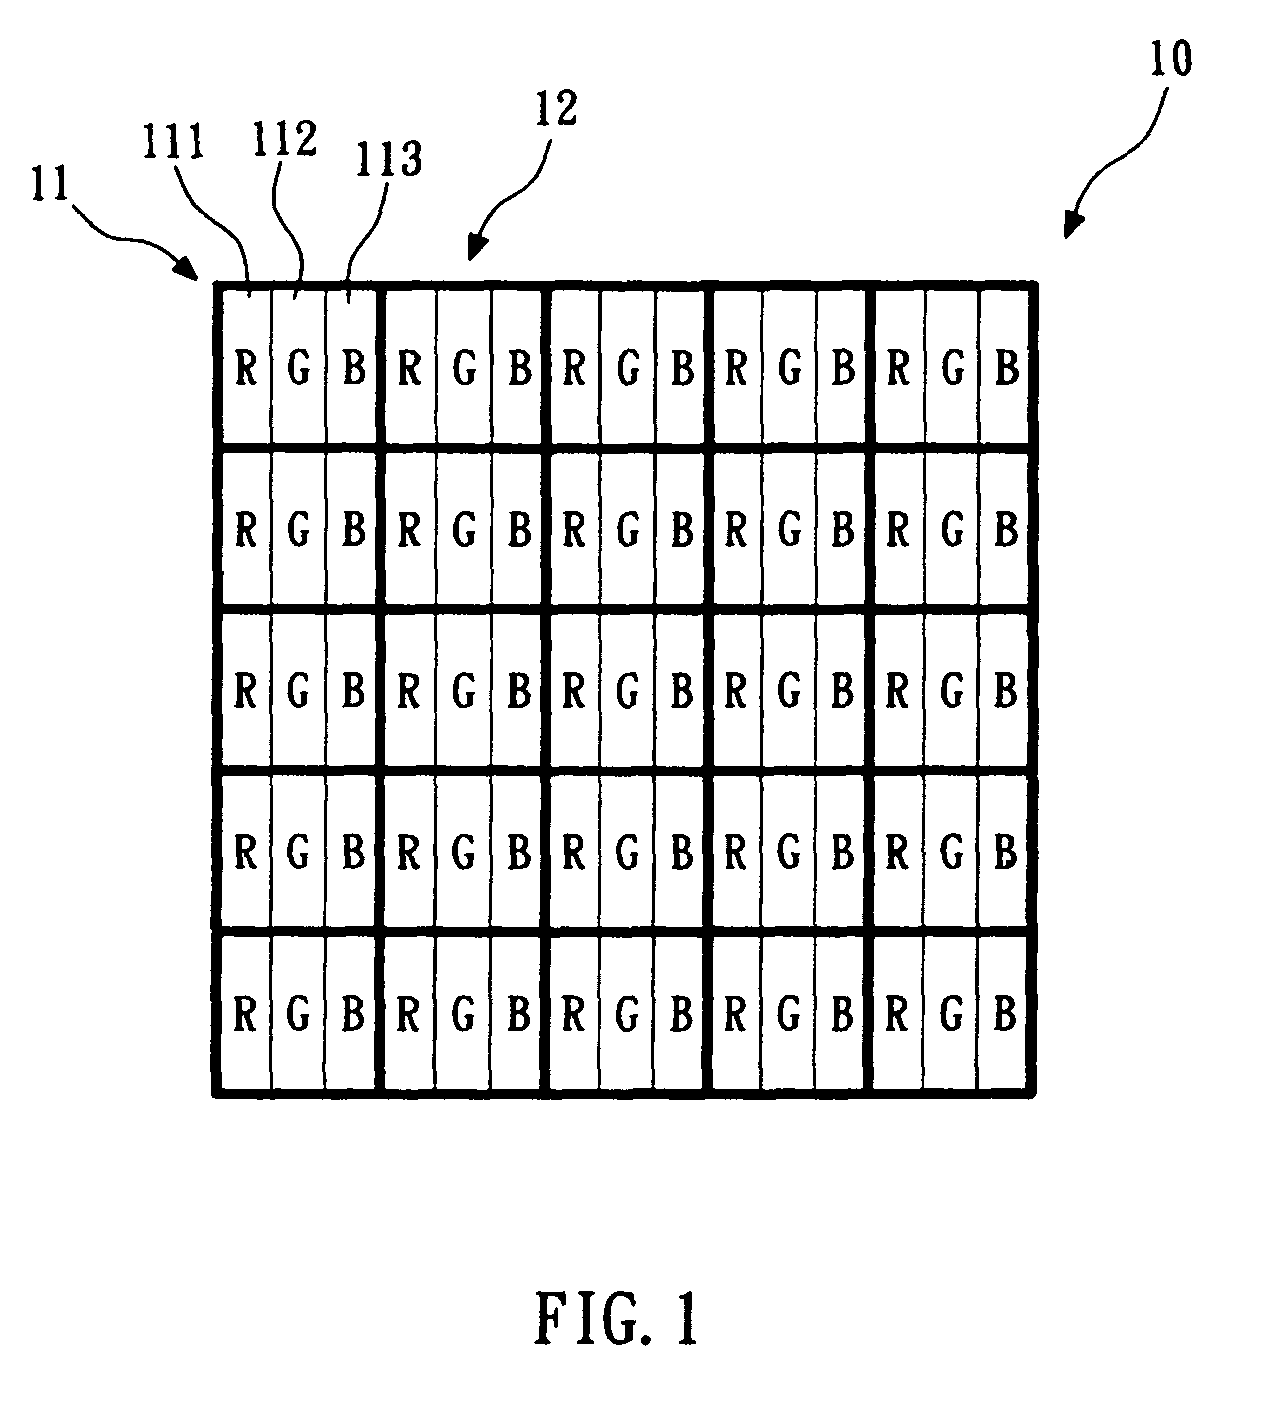 Perceptual color matching method between two different polychromatic displays